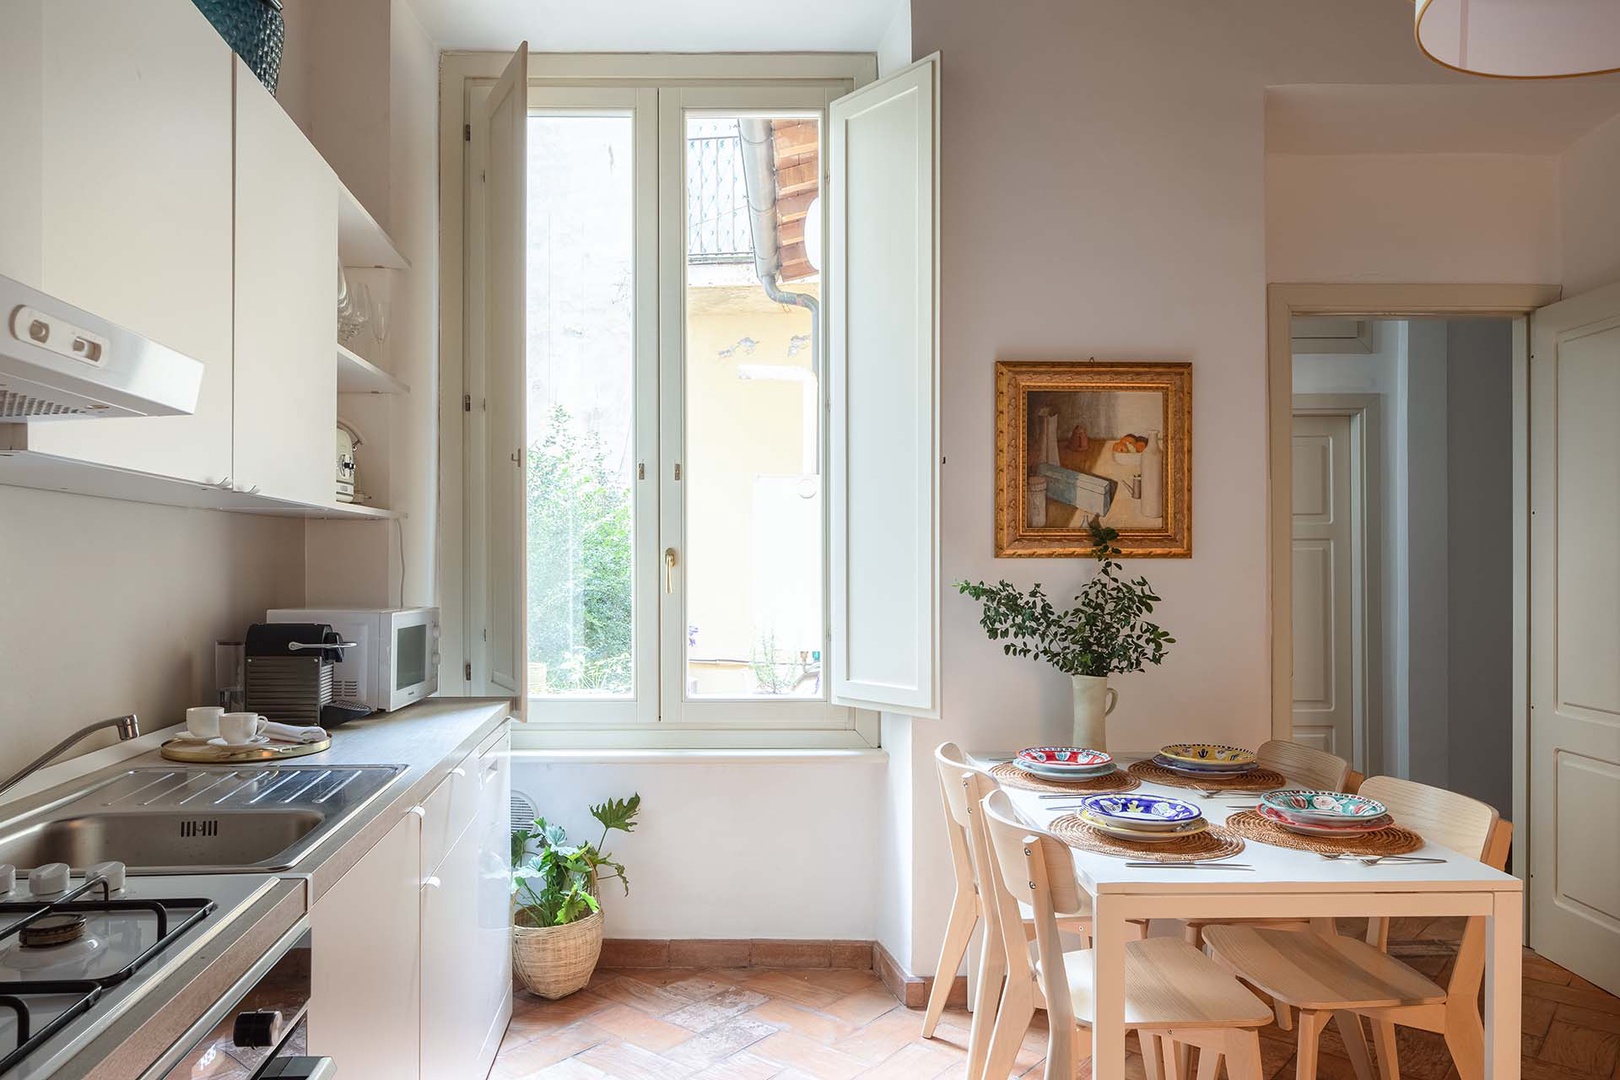 Kitchen is full of light and has a view to the private terrace.